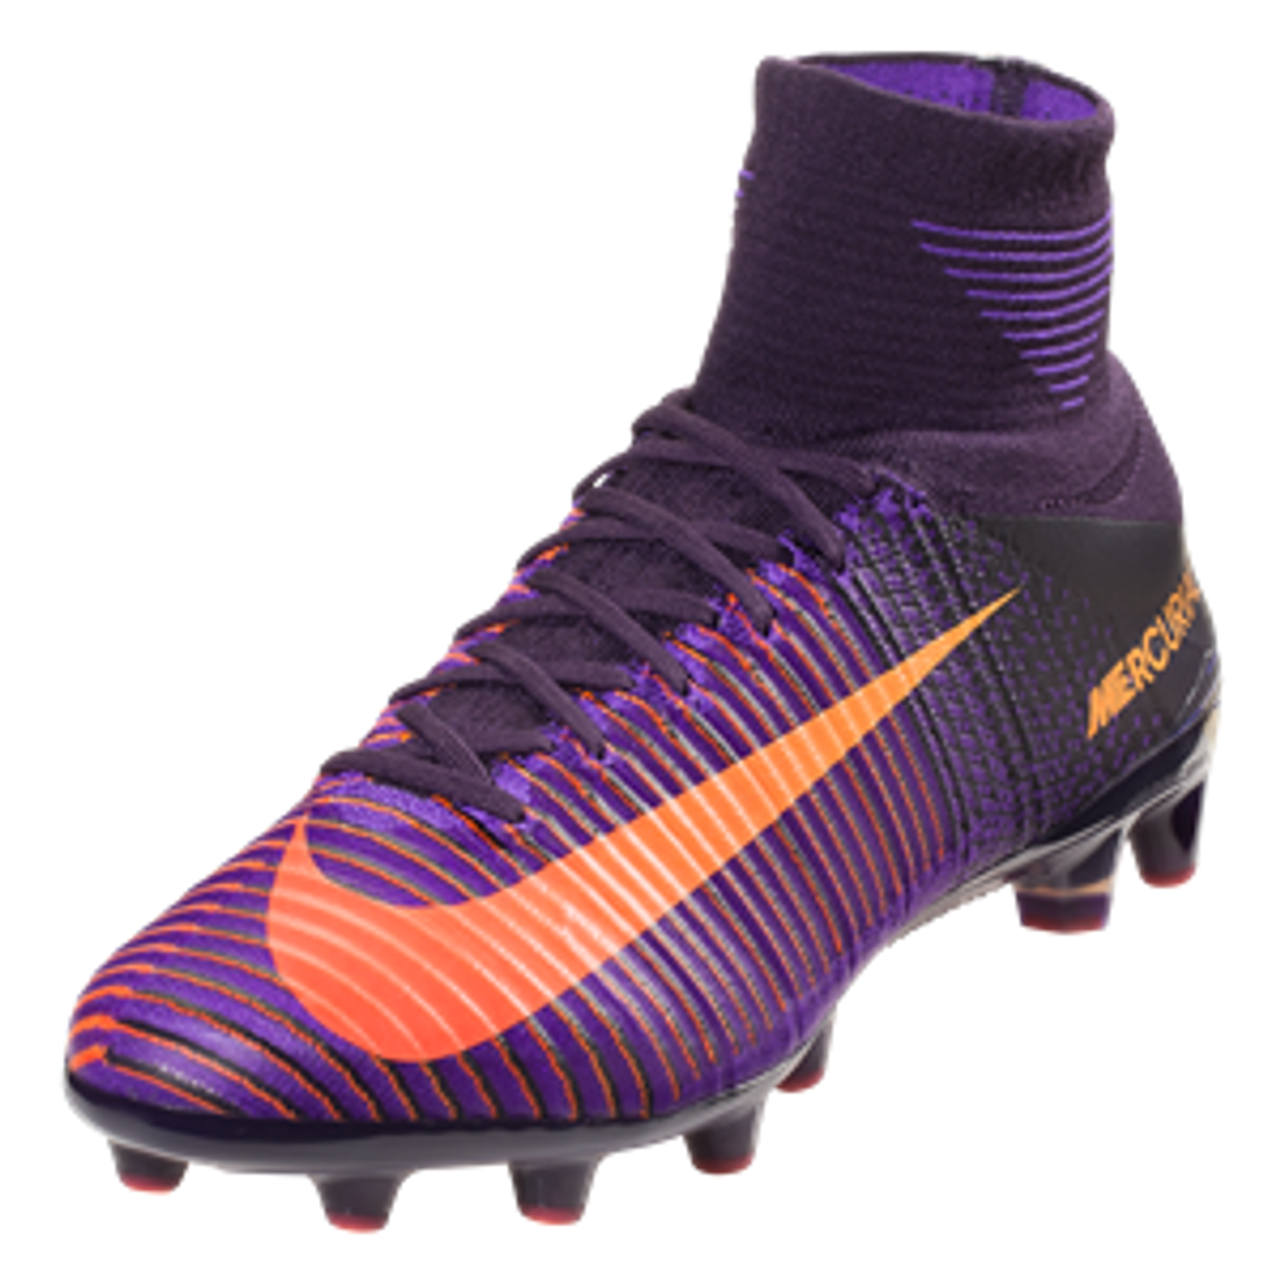 Nike Mercurial Superfly V AG Pro Soccer Cleats 831955 616